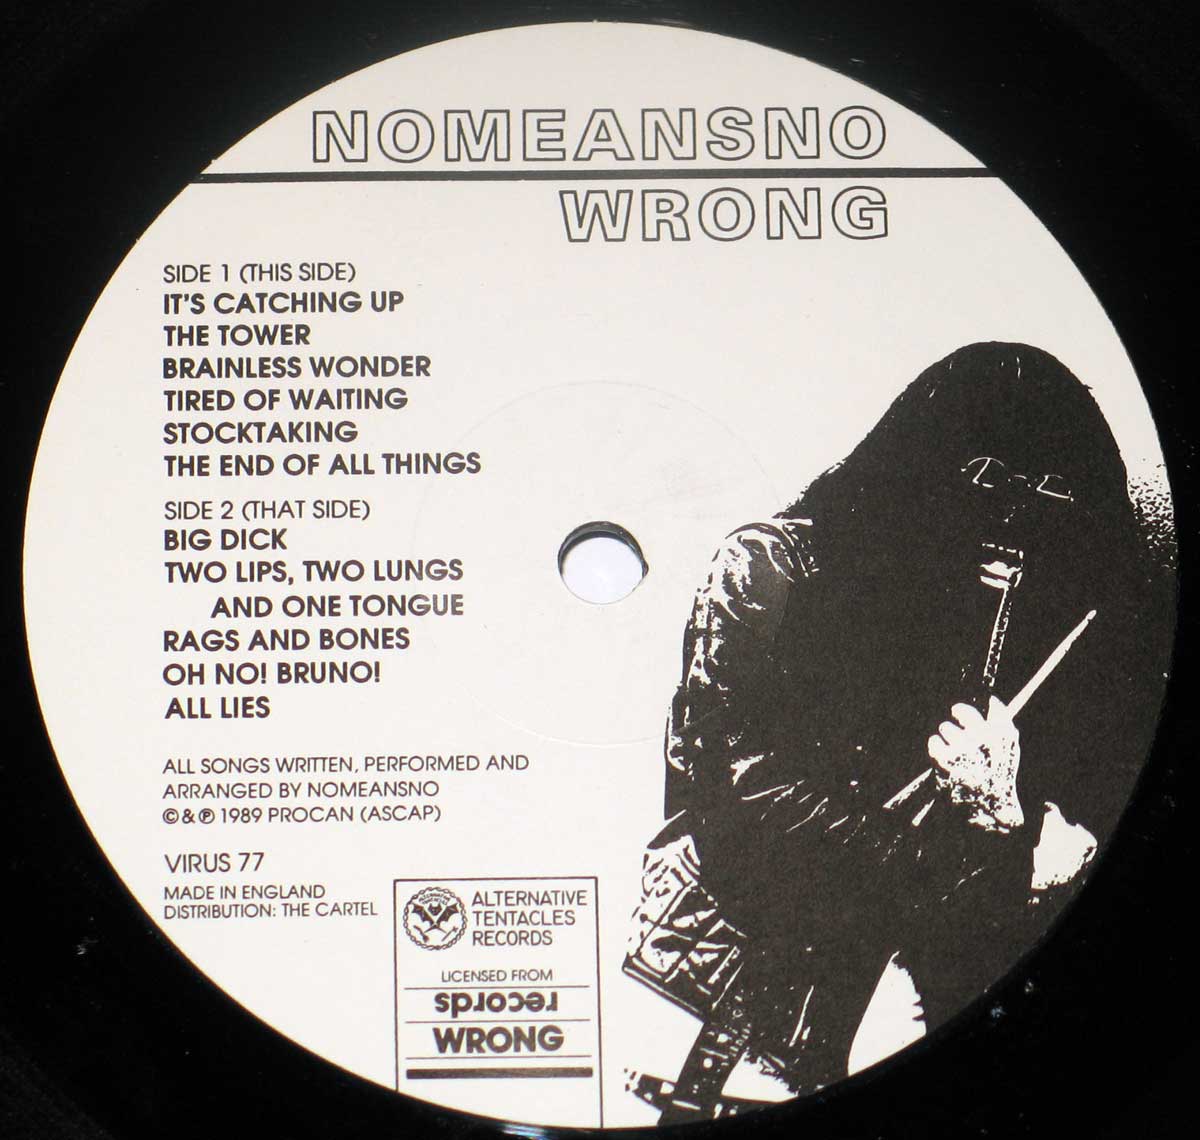 NOMEANSNO Wrong Only Sheep Need a Leader 12" Vinyl LP